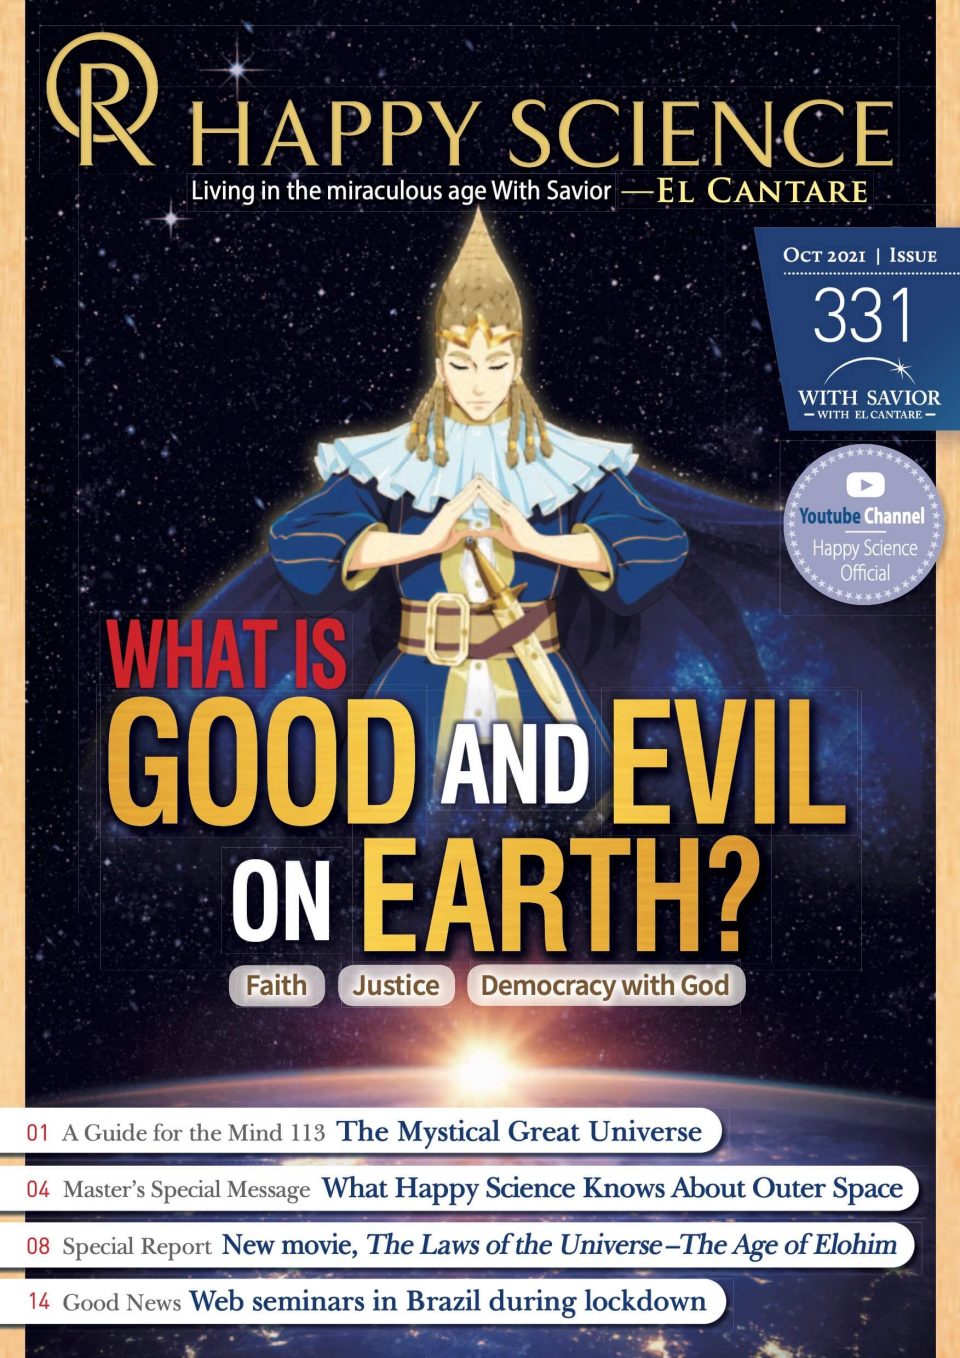 HAPPY SCIENCE Monthly 331 is released!